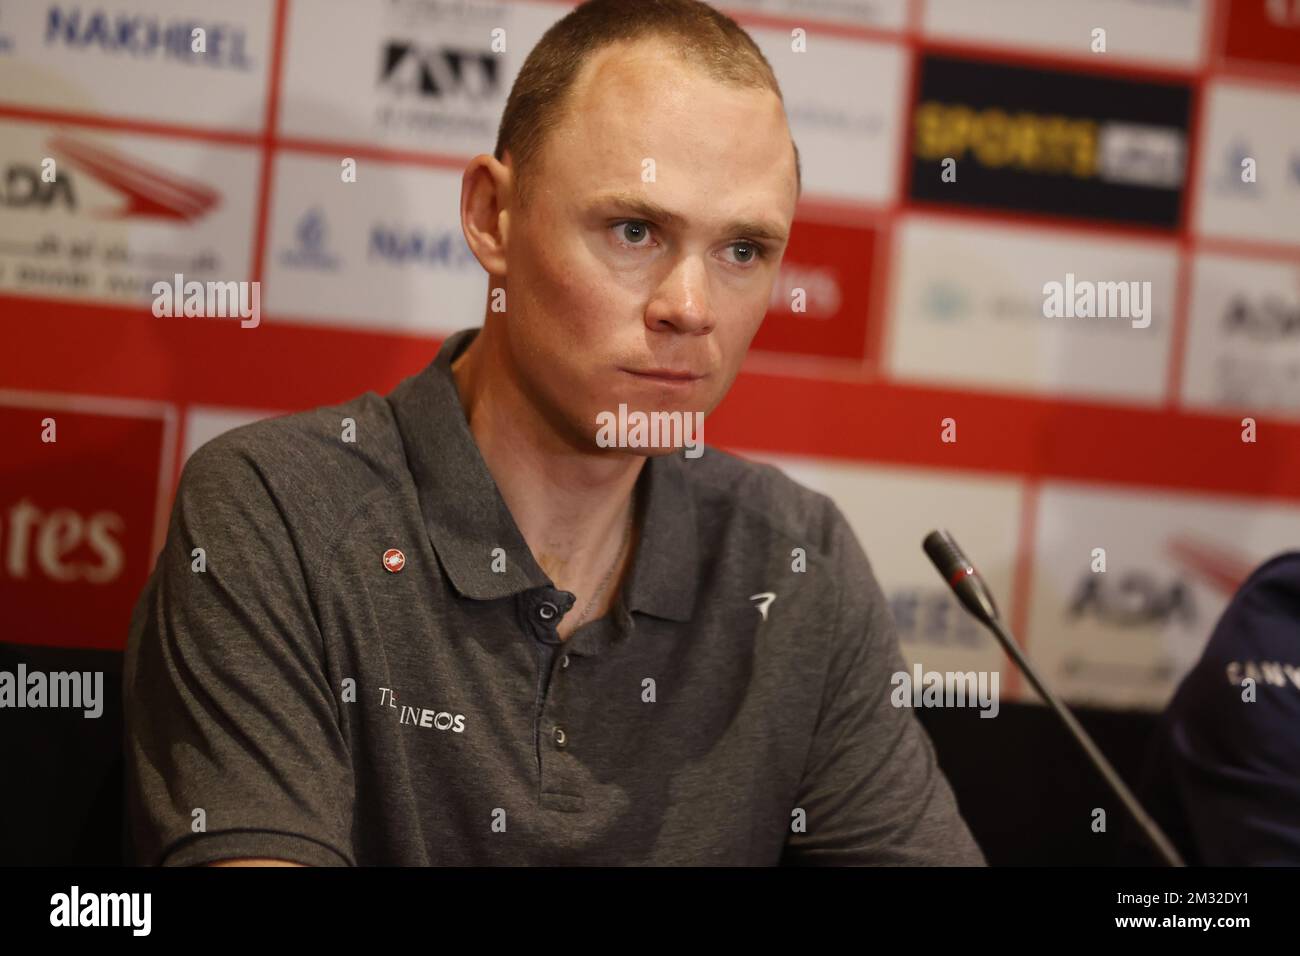 British Chris Froome of Team Ineos pictured during a press conference, in preparation for the 'UAE Tour' 2020 cycling race in Abu Dhabi, United Arab Emirates, Saturday 22 February 2020. This year's edition is taking place from 23 February to 29 February. BELGA PHOTO YUZURU SUNADA FRANCE OUT Stock Photo